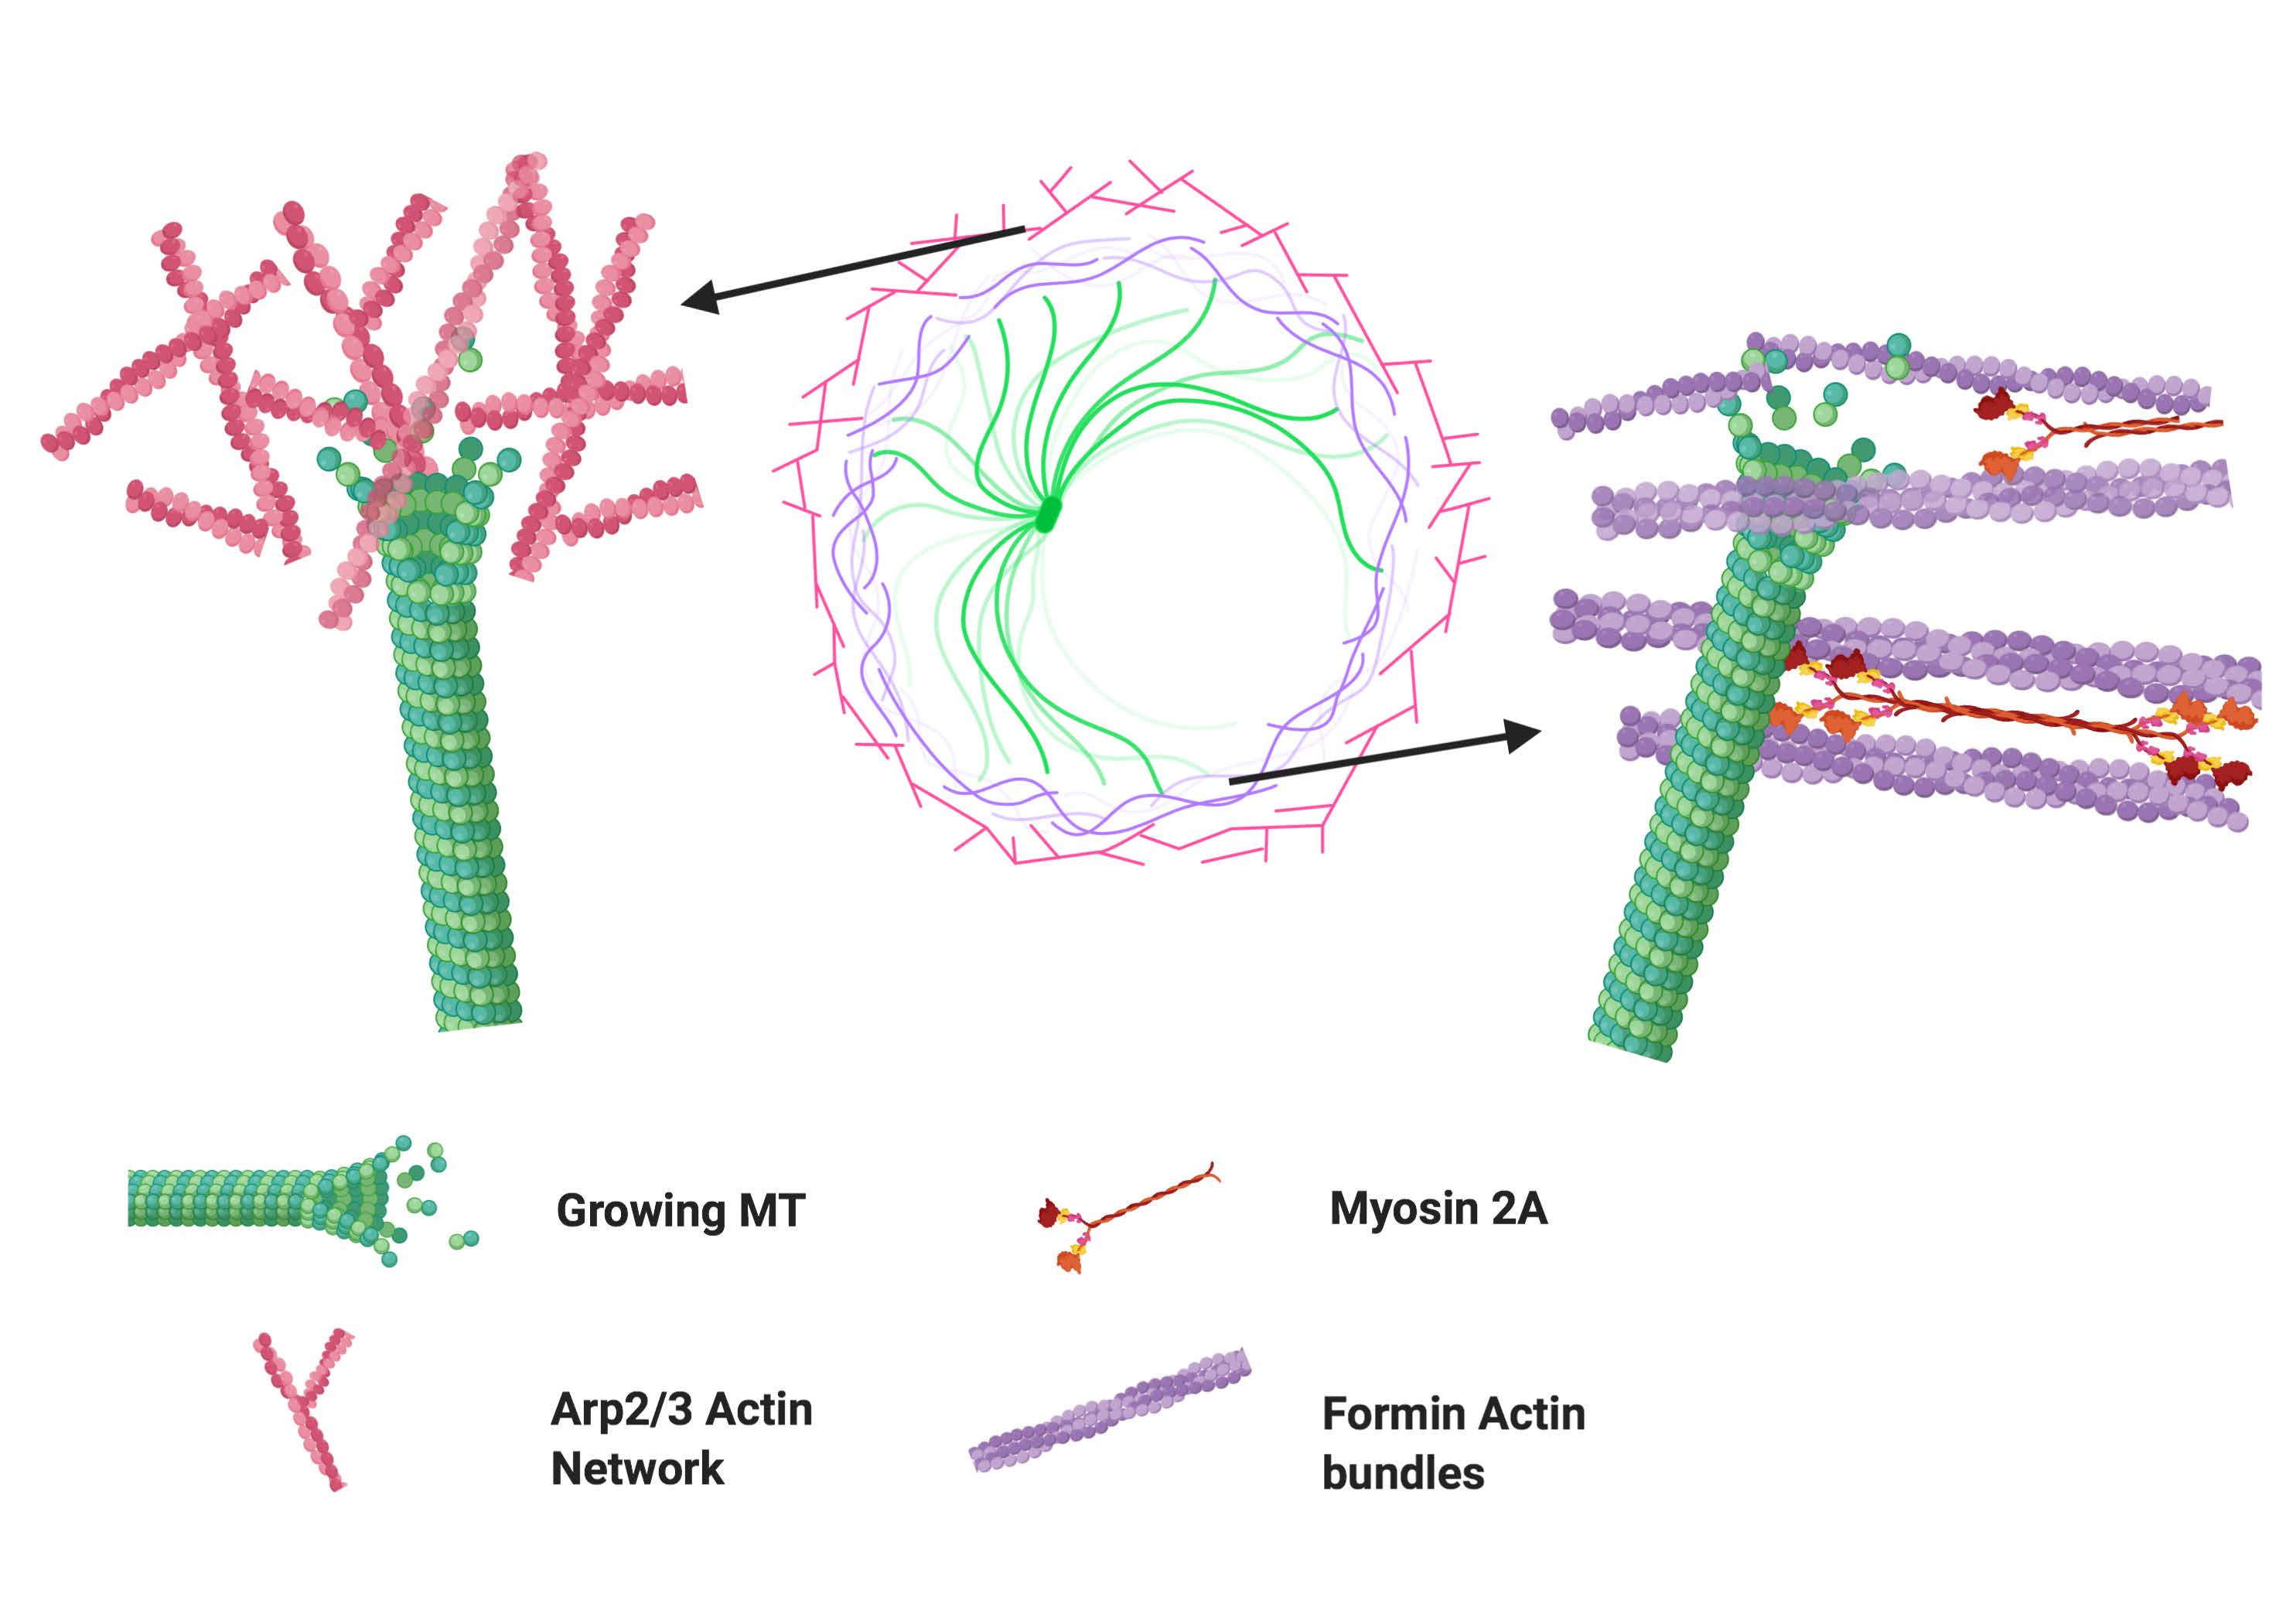 Actomyosin dynamics modulate microtubule deformation and growth during T cell activation